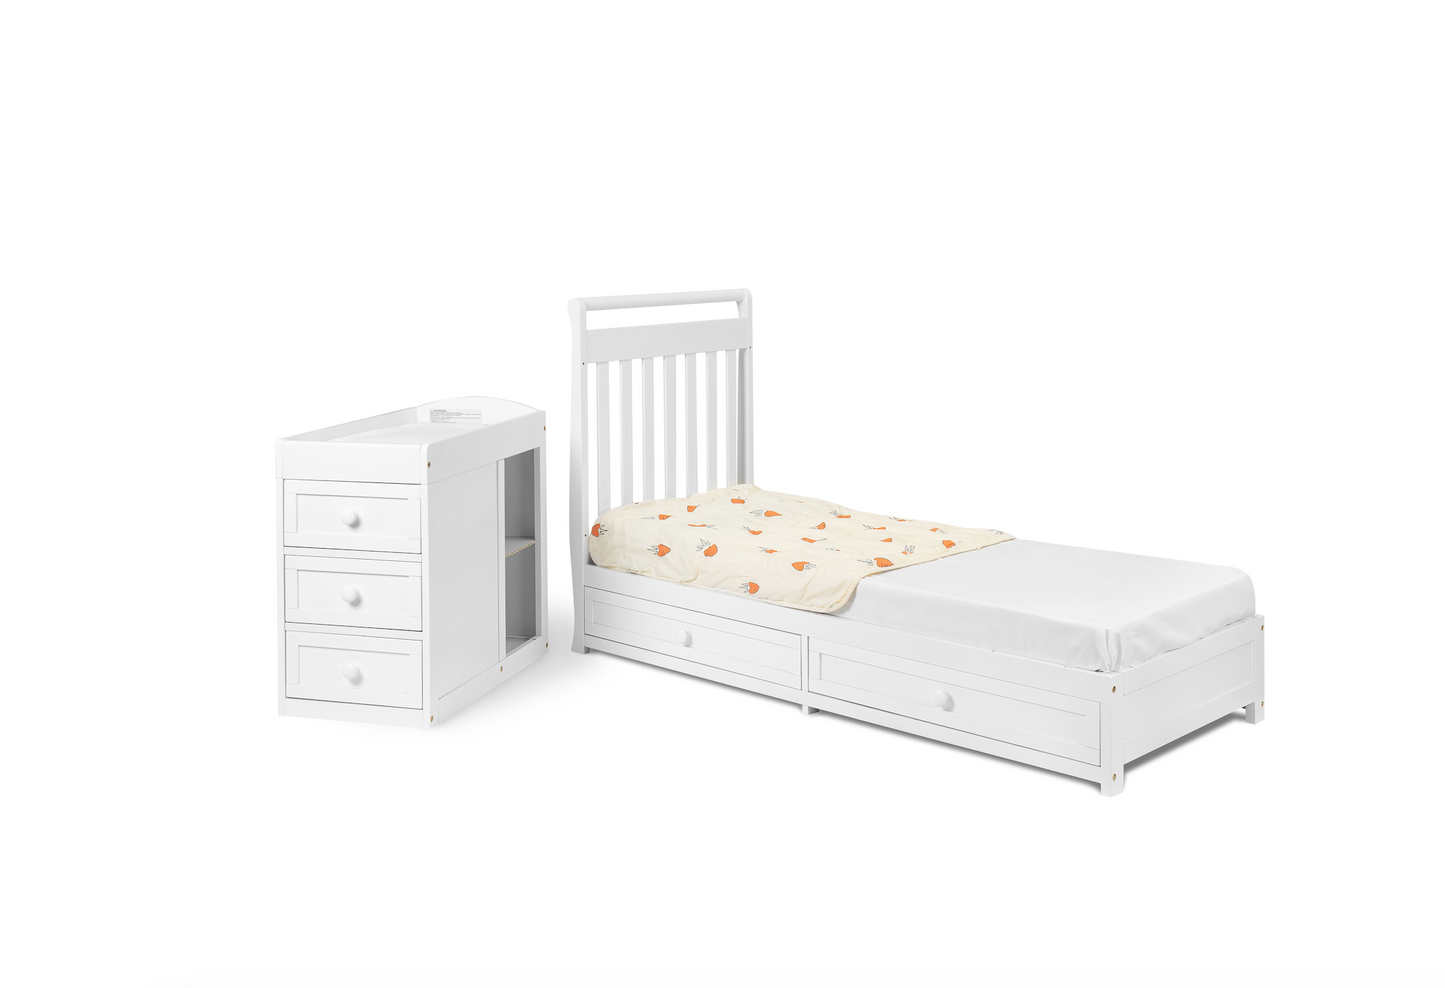 Daphne 2-in-1 Crib and Changing Table